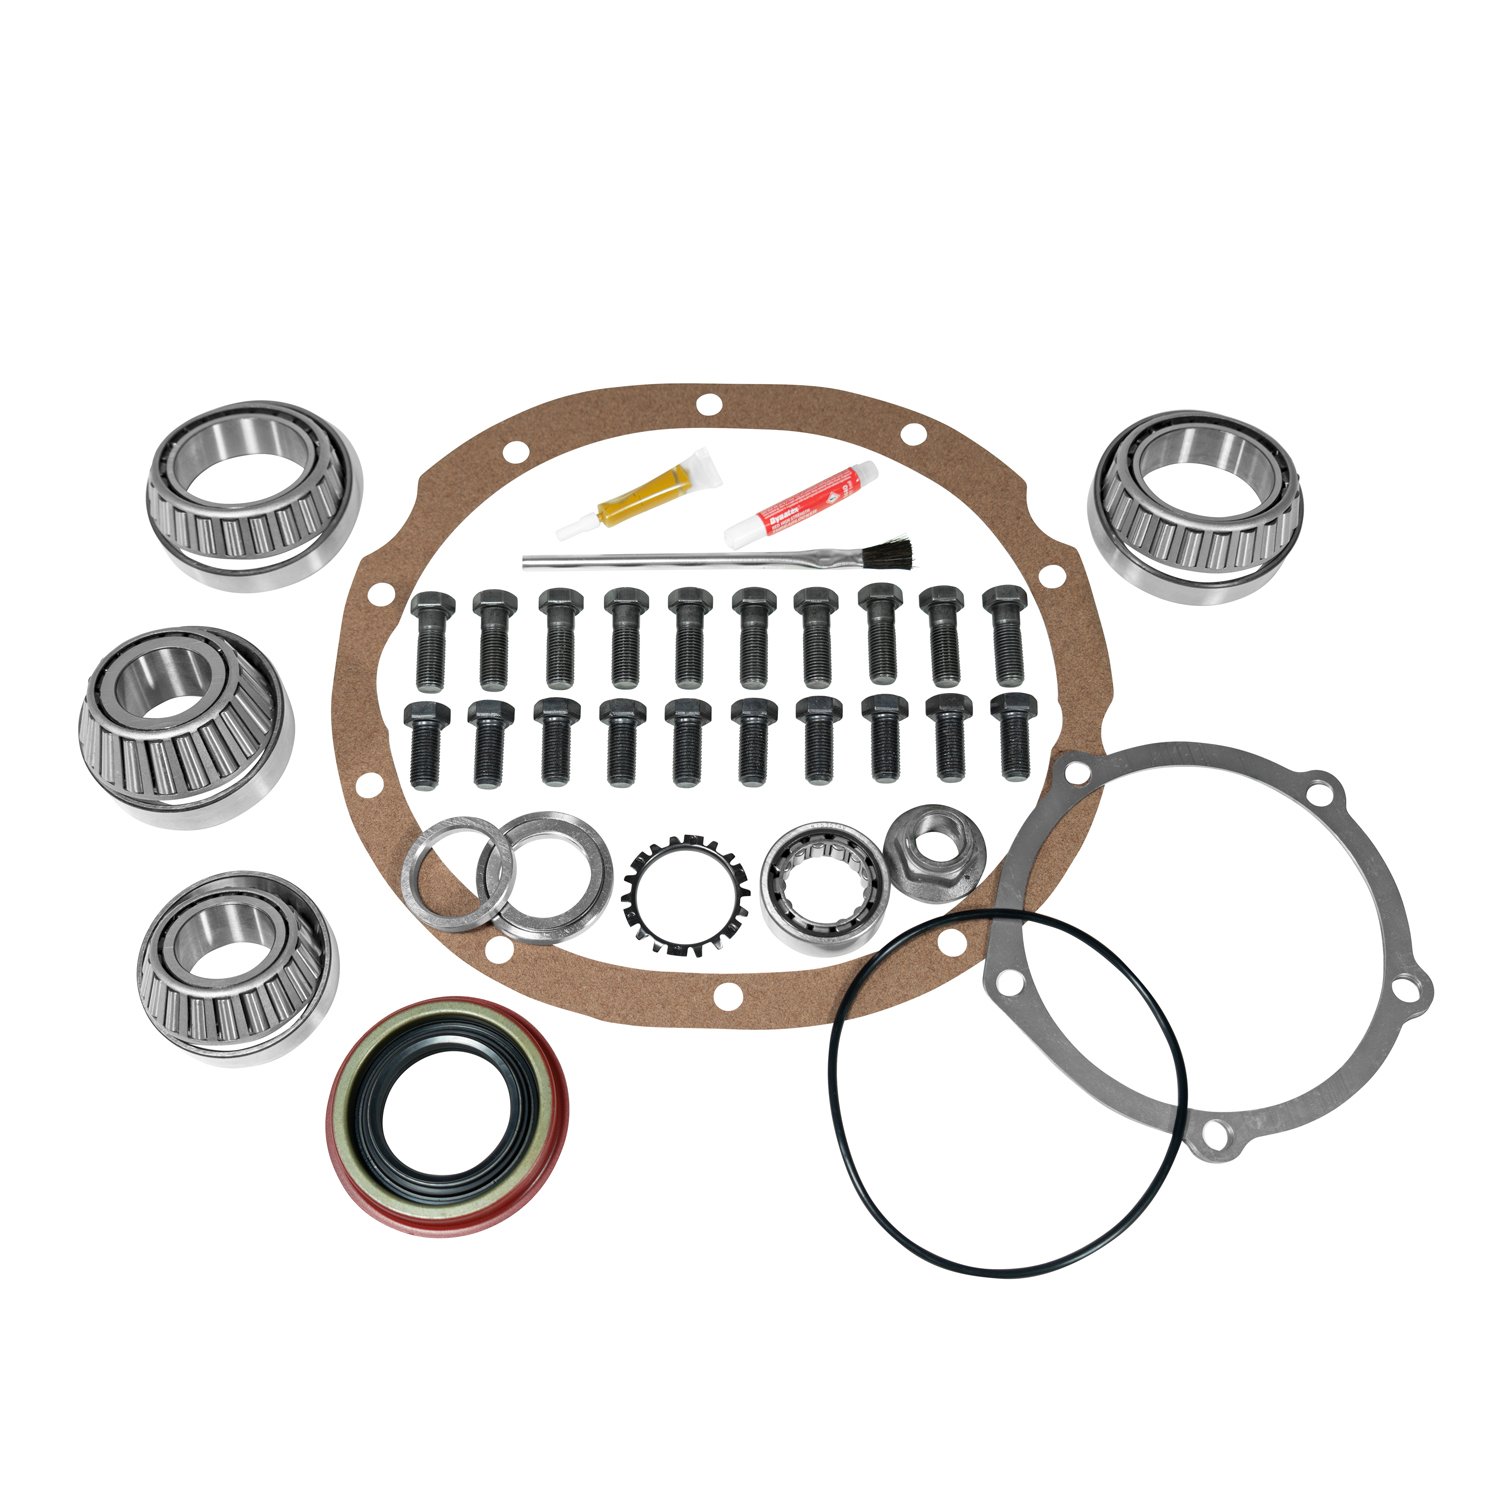 Master Overhaul Kit For Ford 9 in. Lm104911 Differential, 28 Spline Pinion